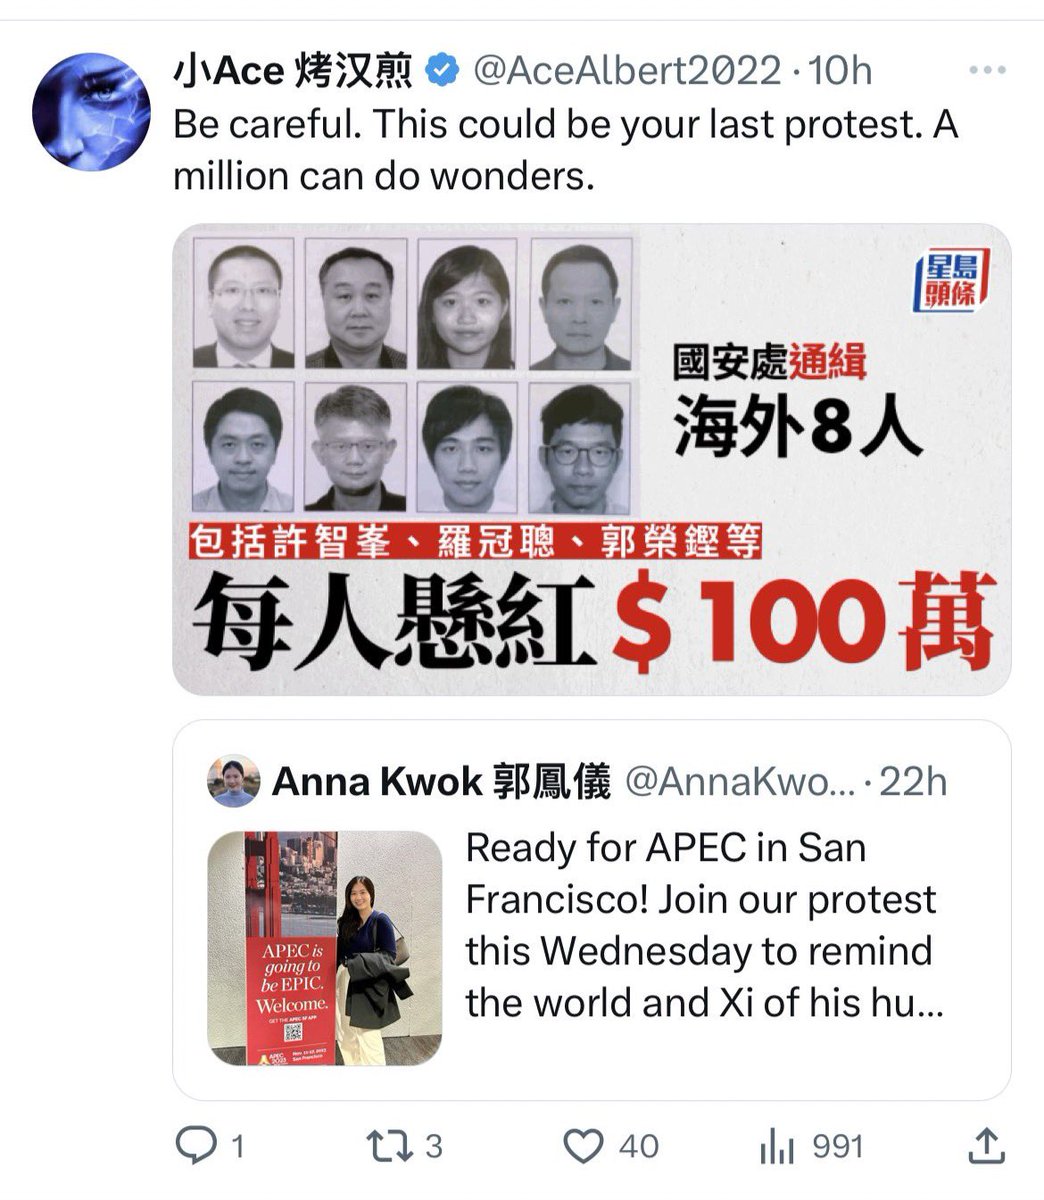 🚨Since announcing my arrival in San Francisco for this Wednesday’s protest against Xi, I have been receiving threats and intimidations from pro-Beijing accounts. They are threatening to “bounty hunt” and encouraging people to “drop her unconscious body at the Chinese consulate.”